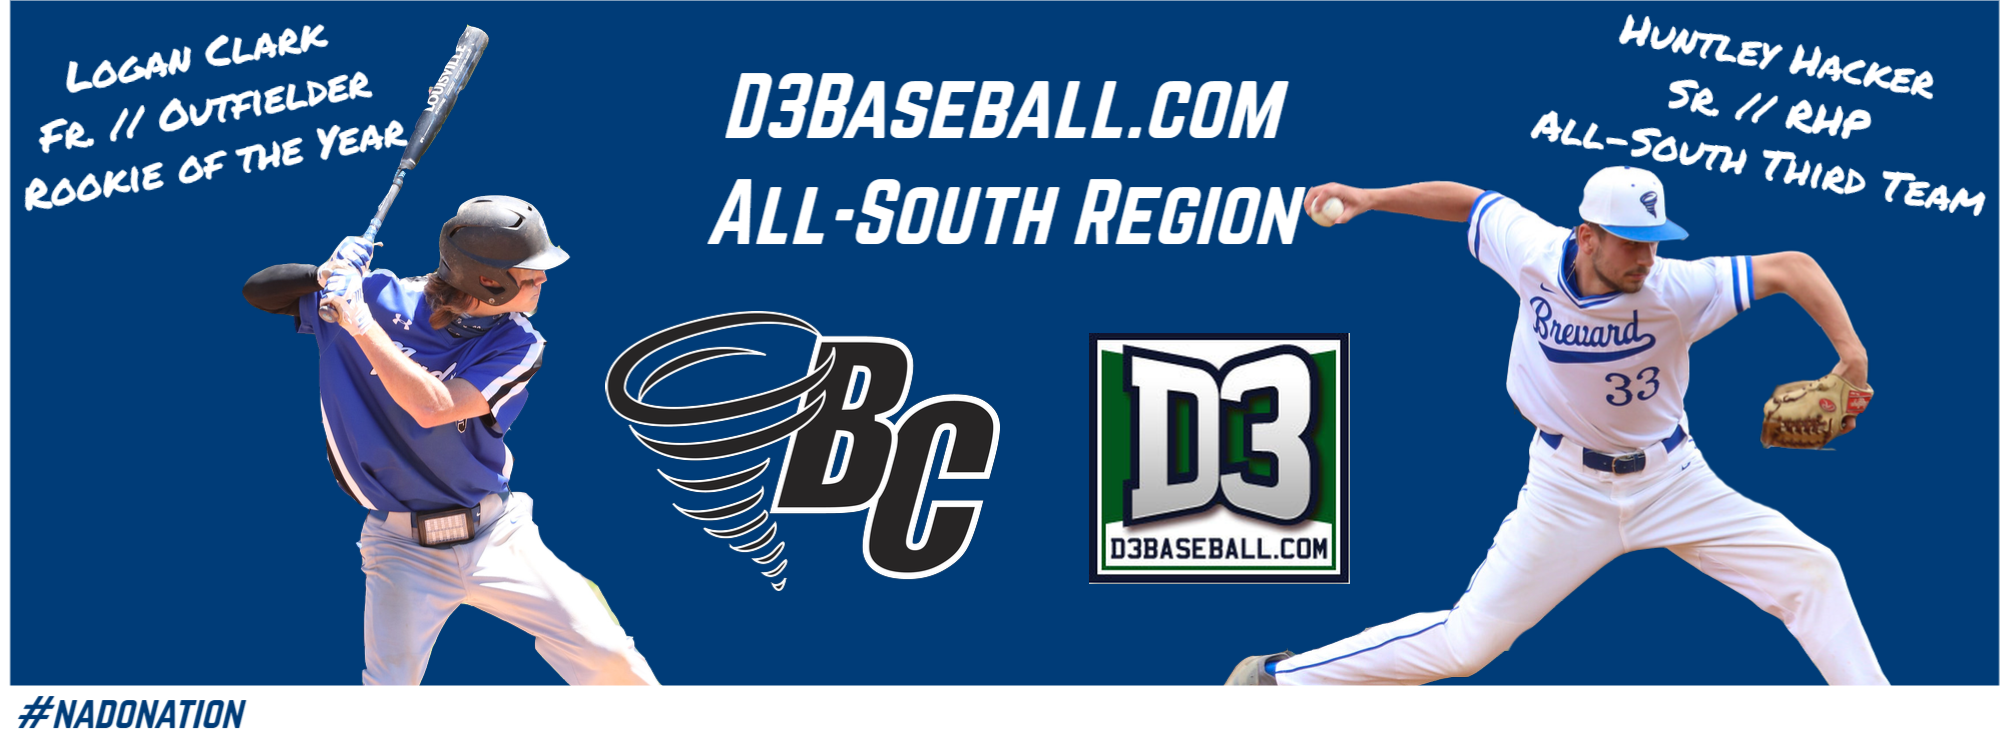 Clark & Hacker Honored by D3baseball.com, Earn All-South Region Accolades